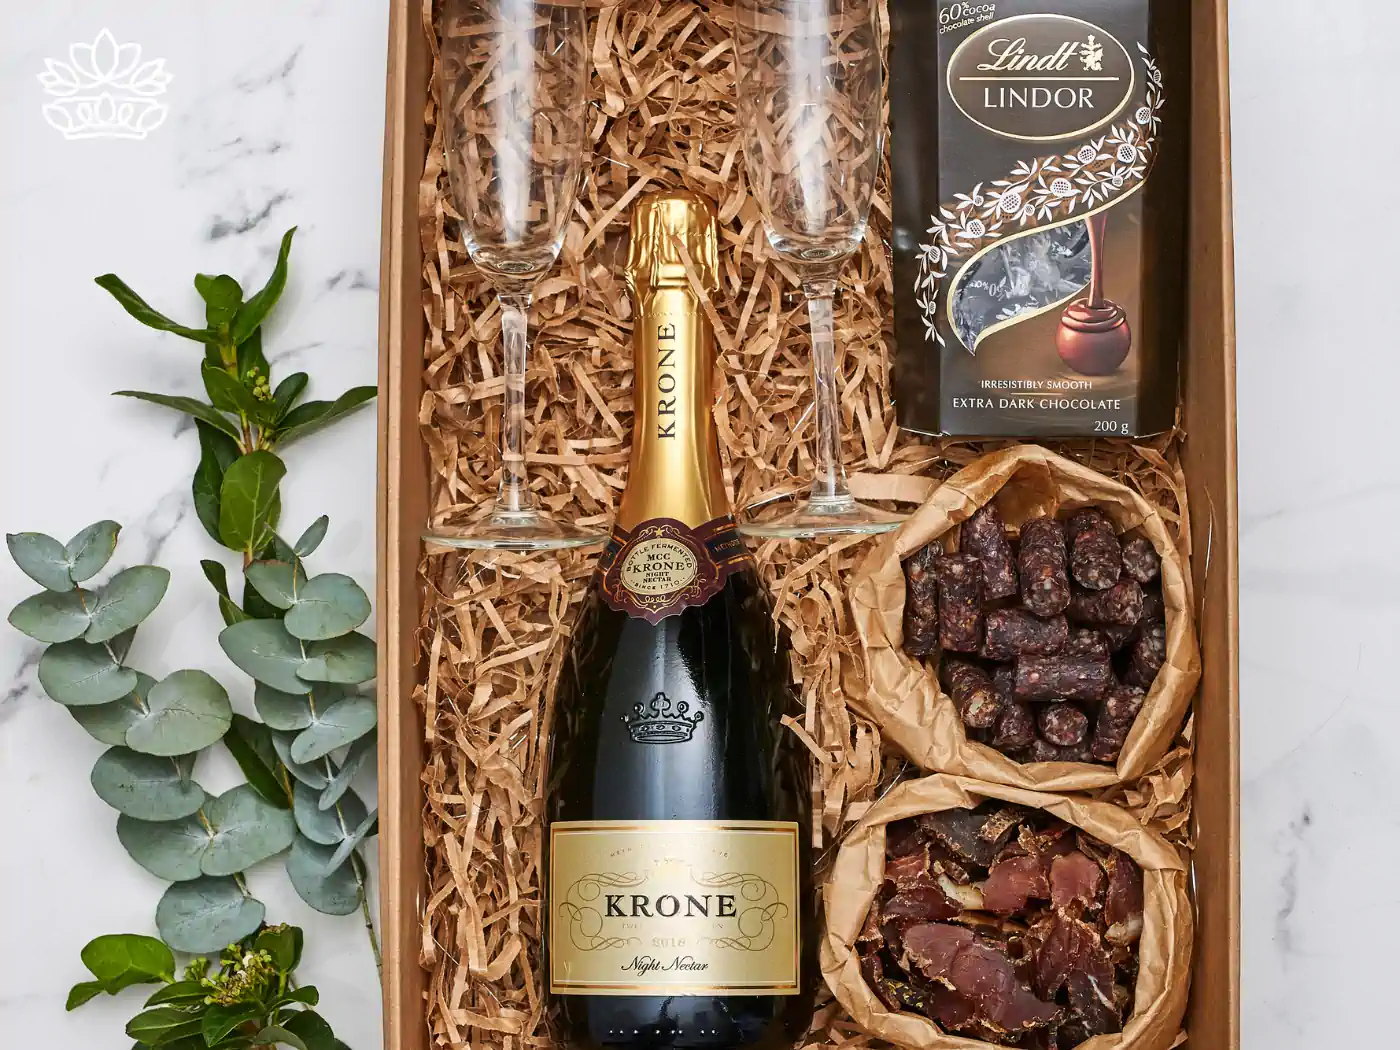 Sophisticated housewarming gift box filled with a bottle of Krone Night Nectar sparkling wine, a champagne flute, Lindt Extra Dark Chocolate, and gourmet cured meats, beautifully arranged in a wooden box with shredded filling and garnished with greenery. A luxurious welcome to a new home. Fabulous Flowers and Gifts.